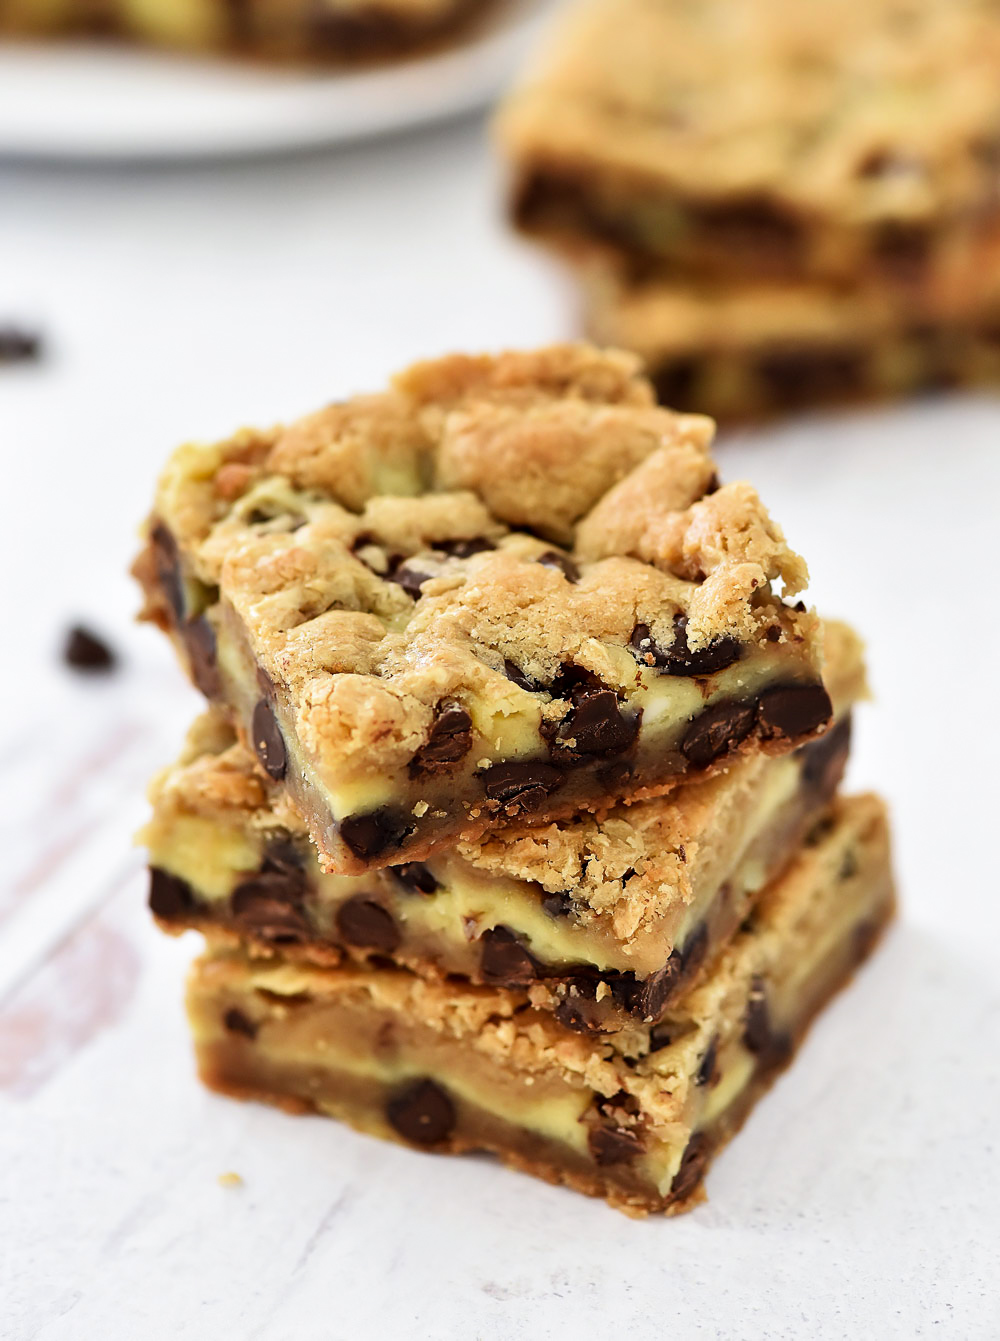 Layers of chocolate chip cookie and cheesecake are what is inside these Cheesecake Chocolate Chip Cookie Bars.